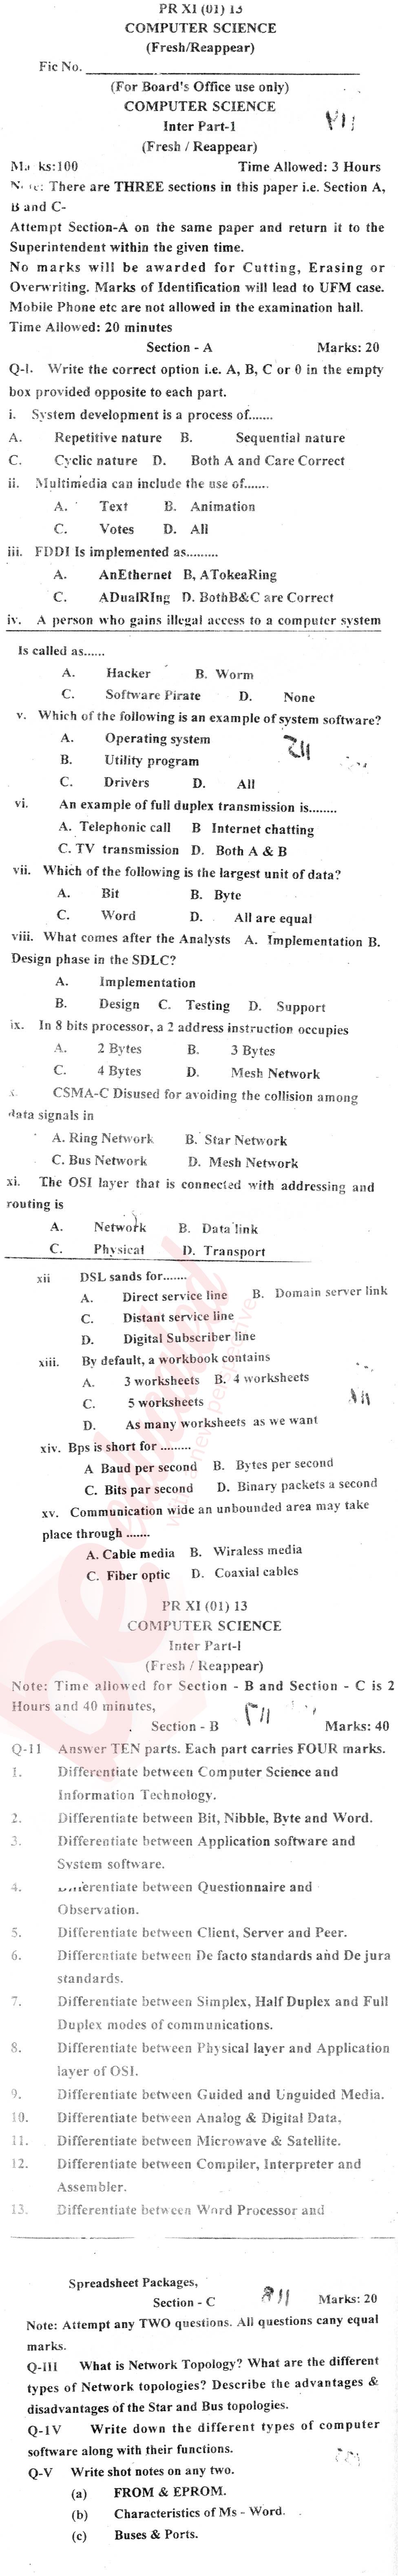 Computer Science ICS Part 1 Past Paper Group 1 BISE Bannu 2013